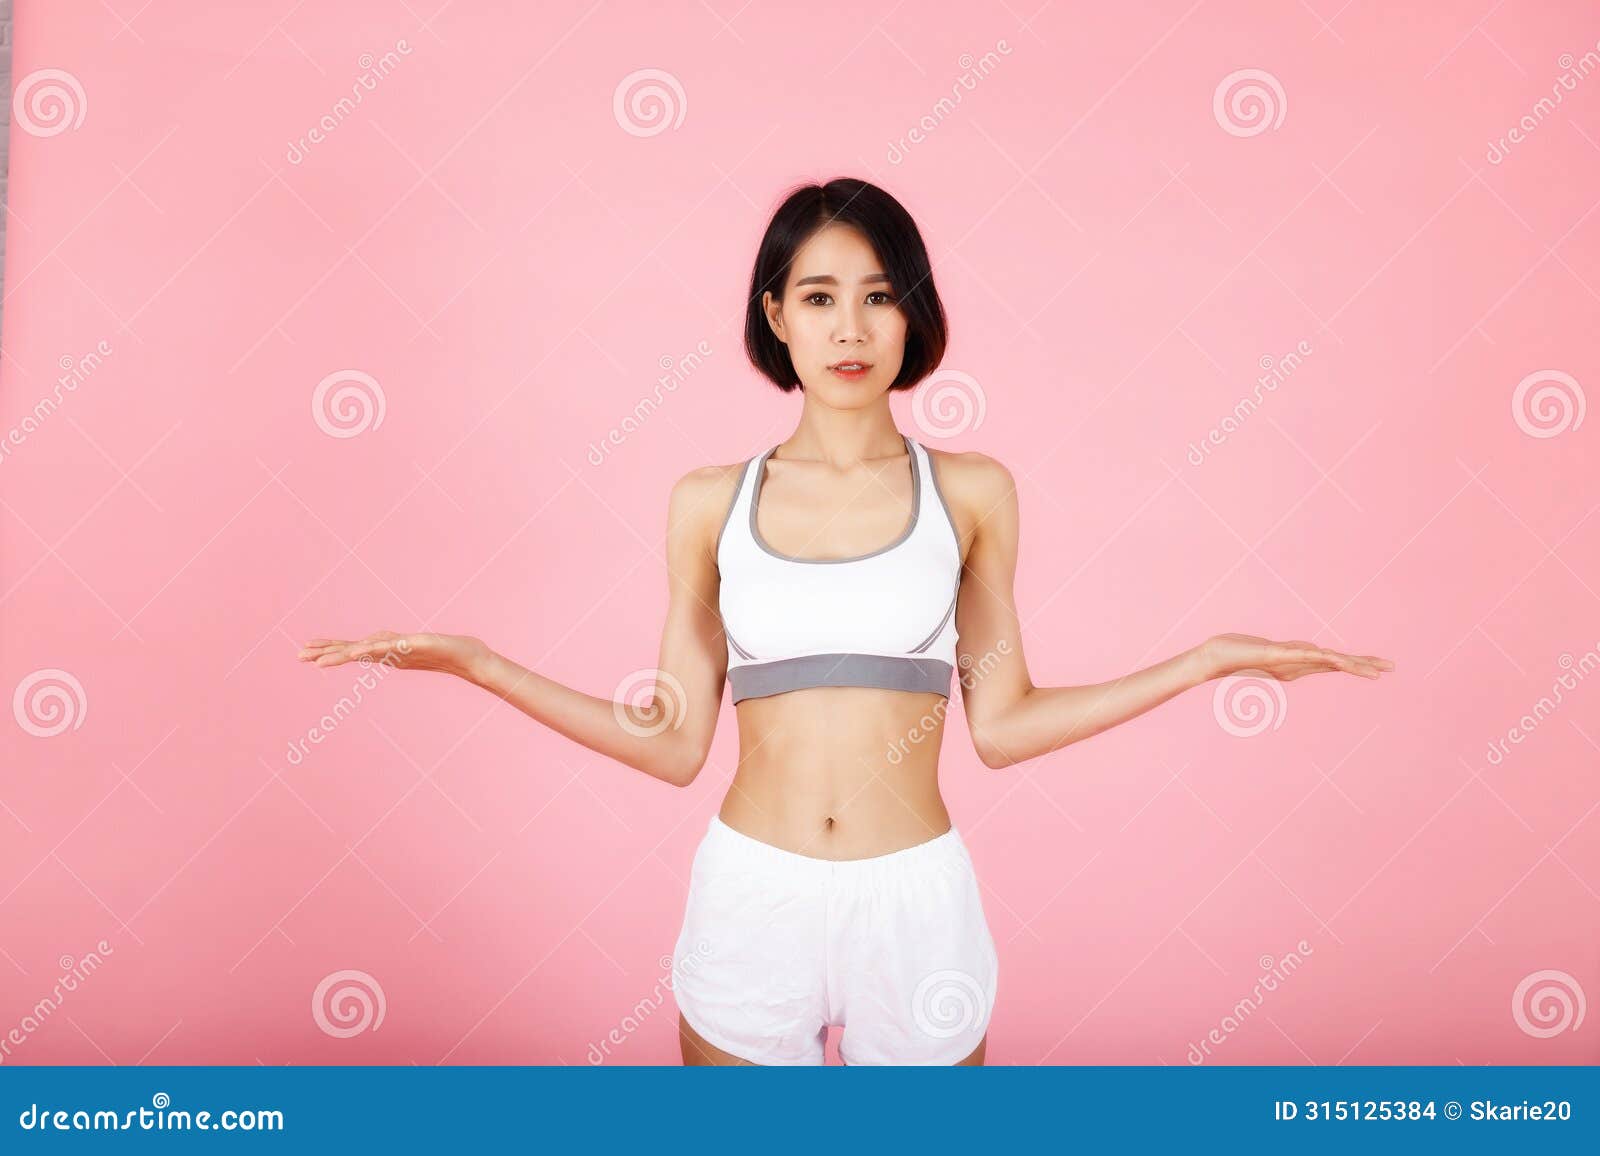 young slim fitness asian woman in white sportwear shows something on her palms  on pink background